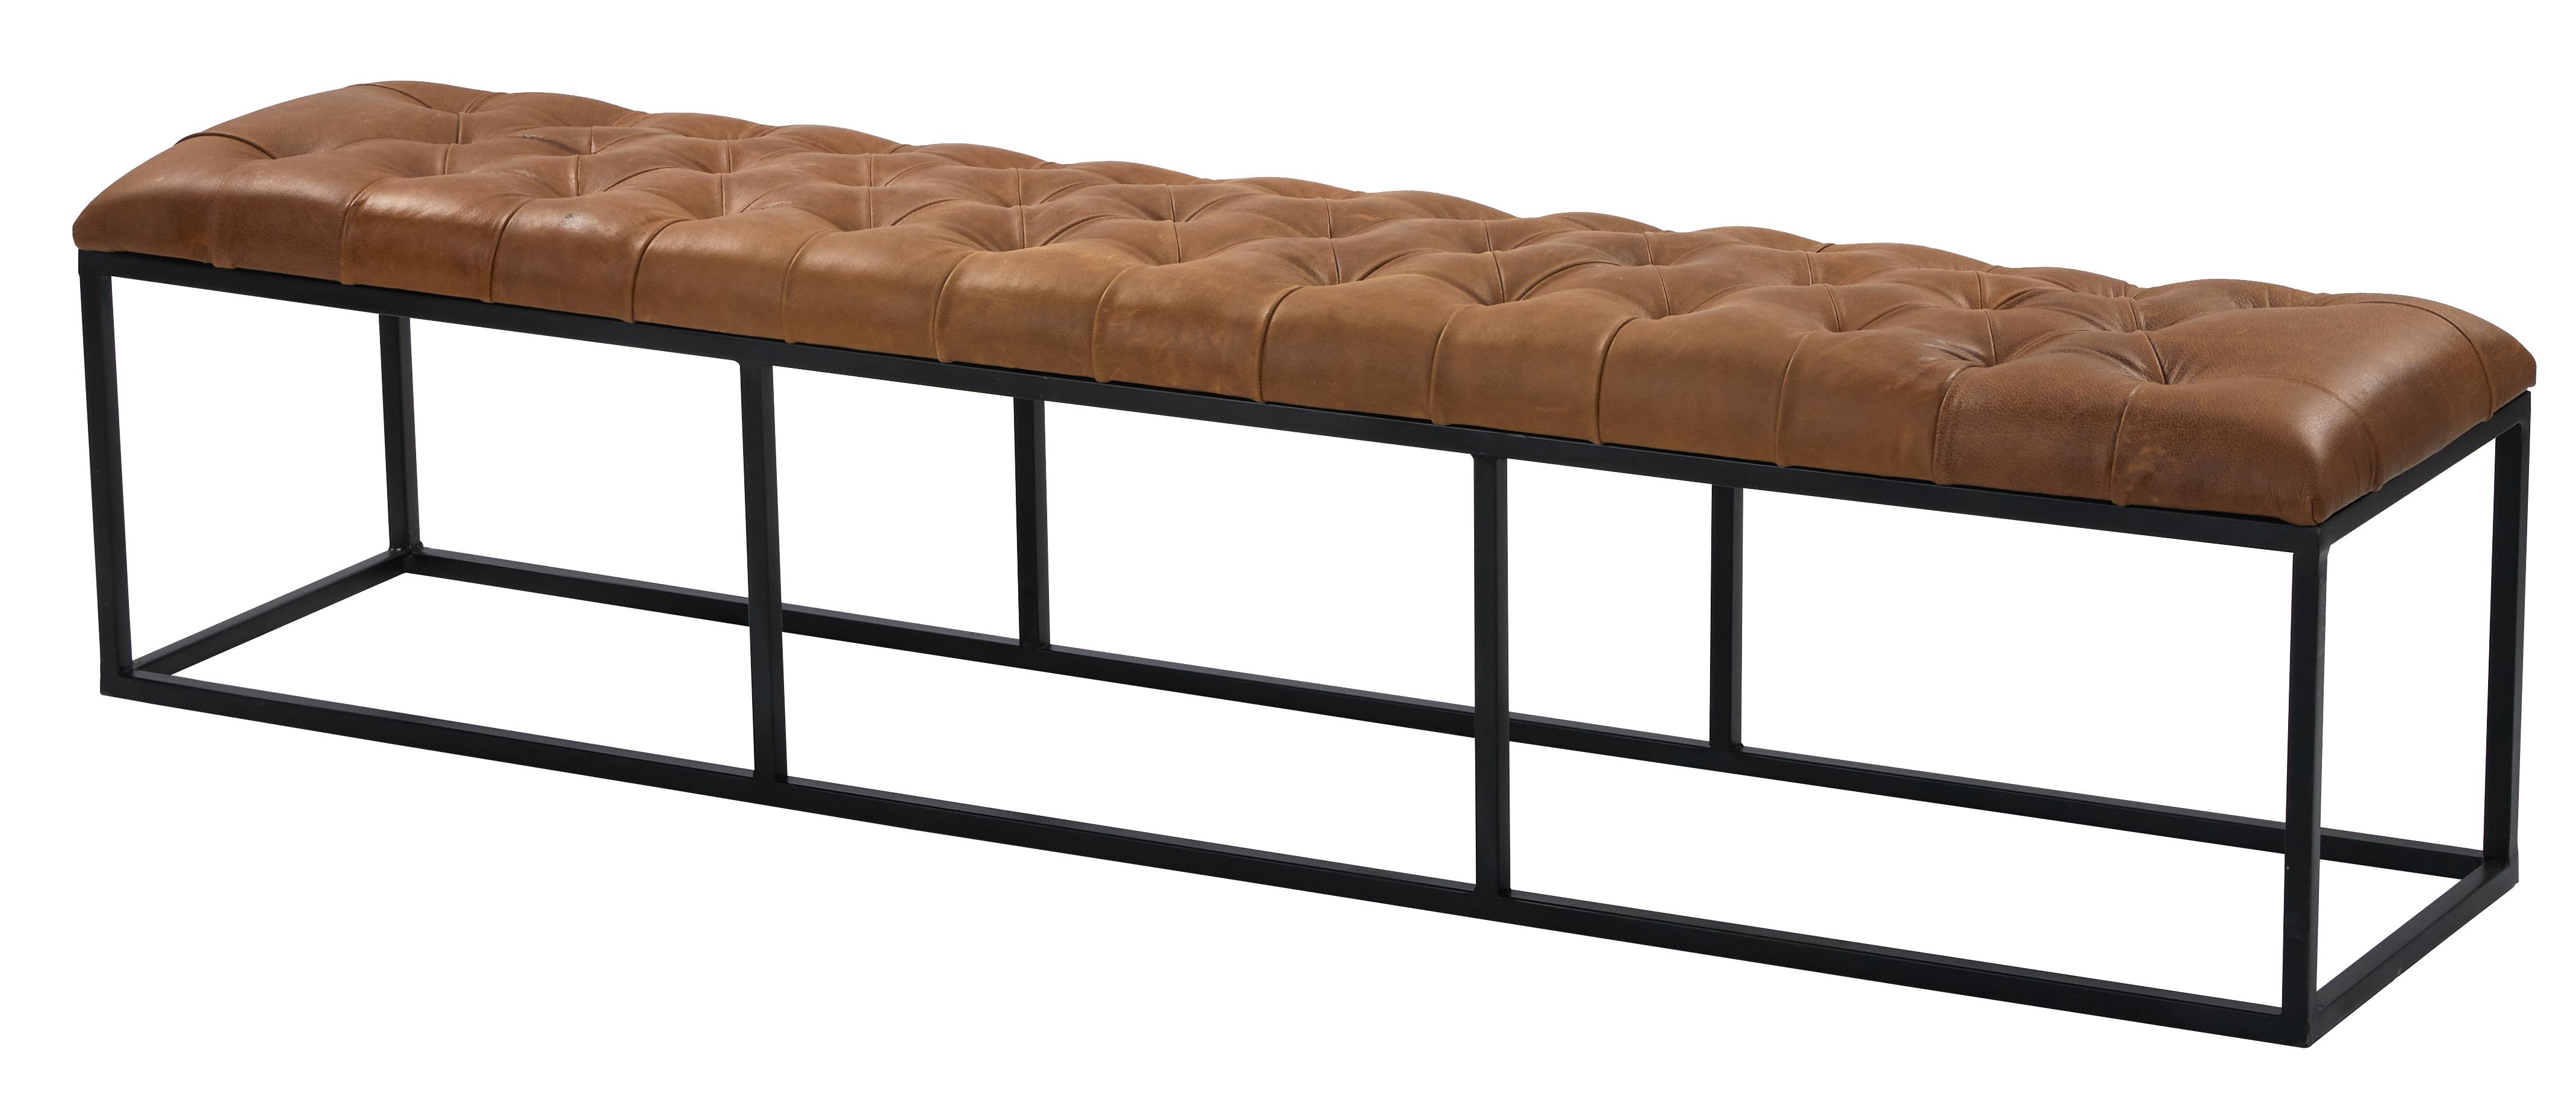 Transitional Bench CAC-59011 Judson CAC-59011 in Brown Leather